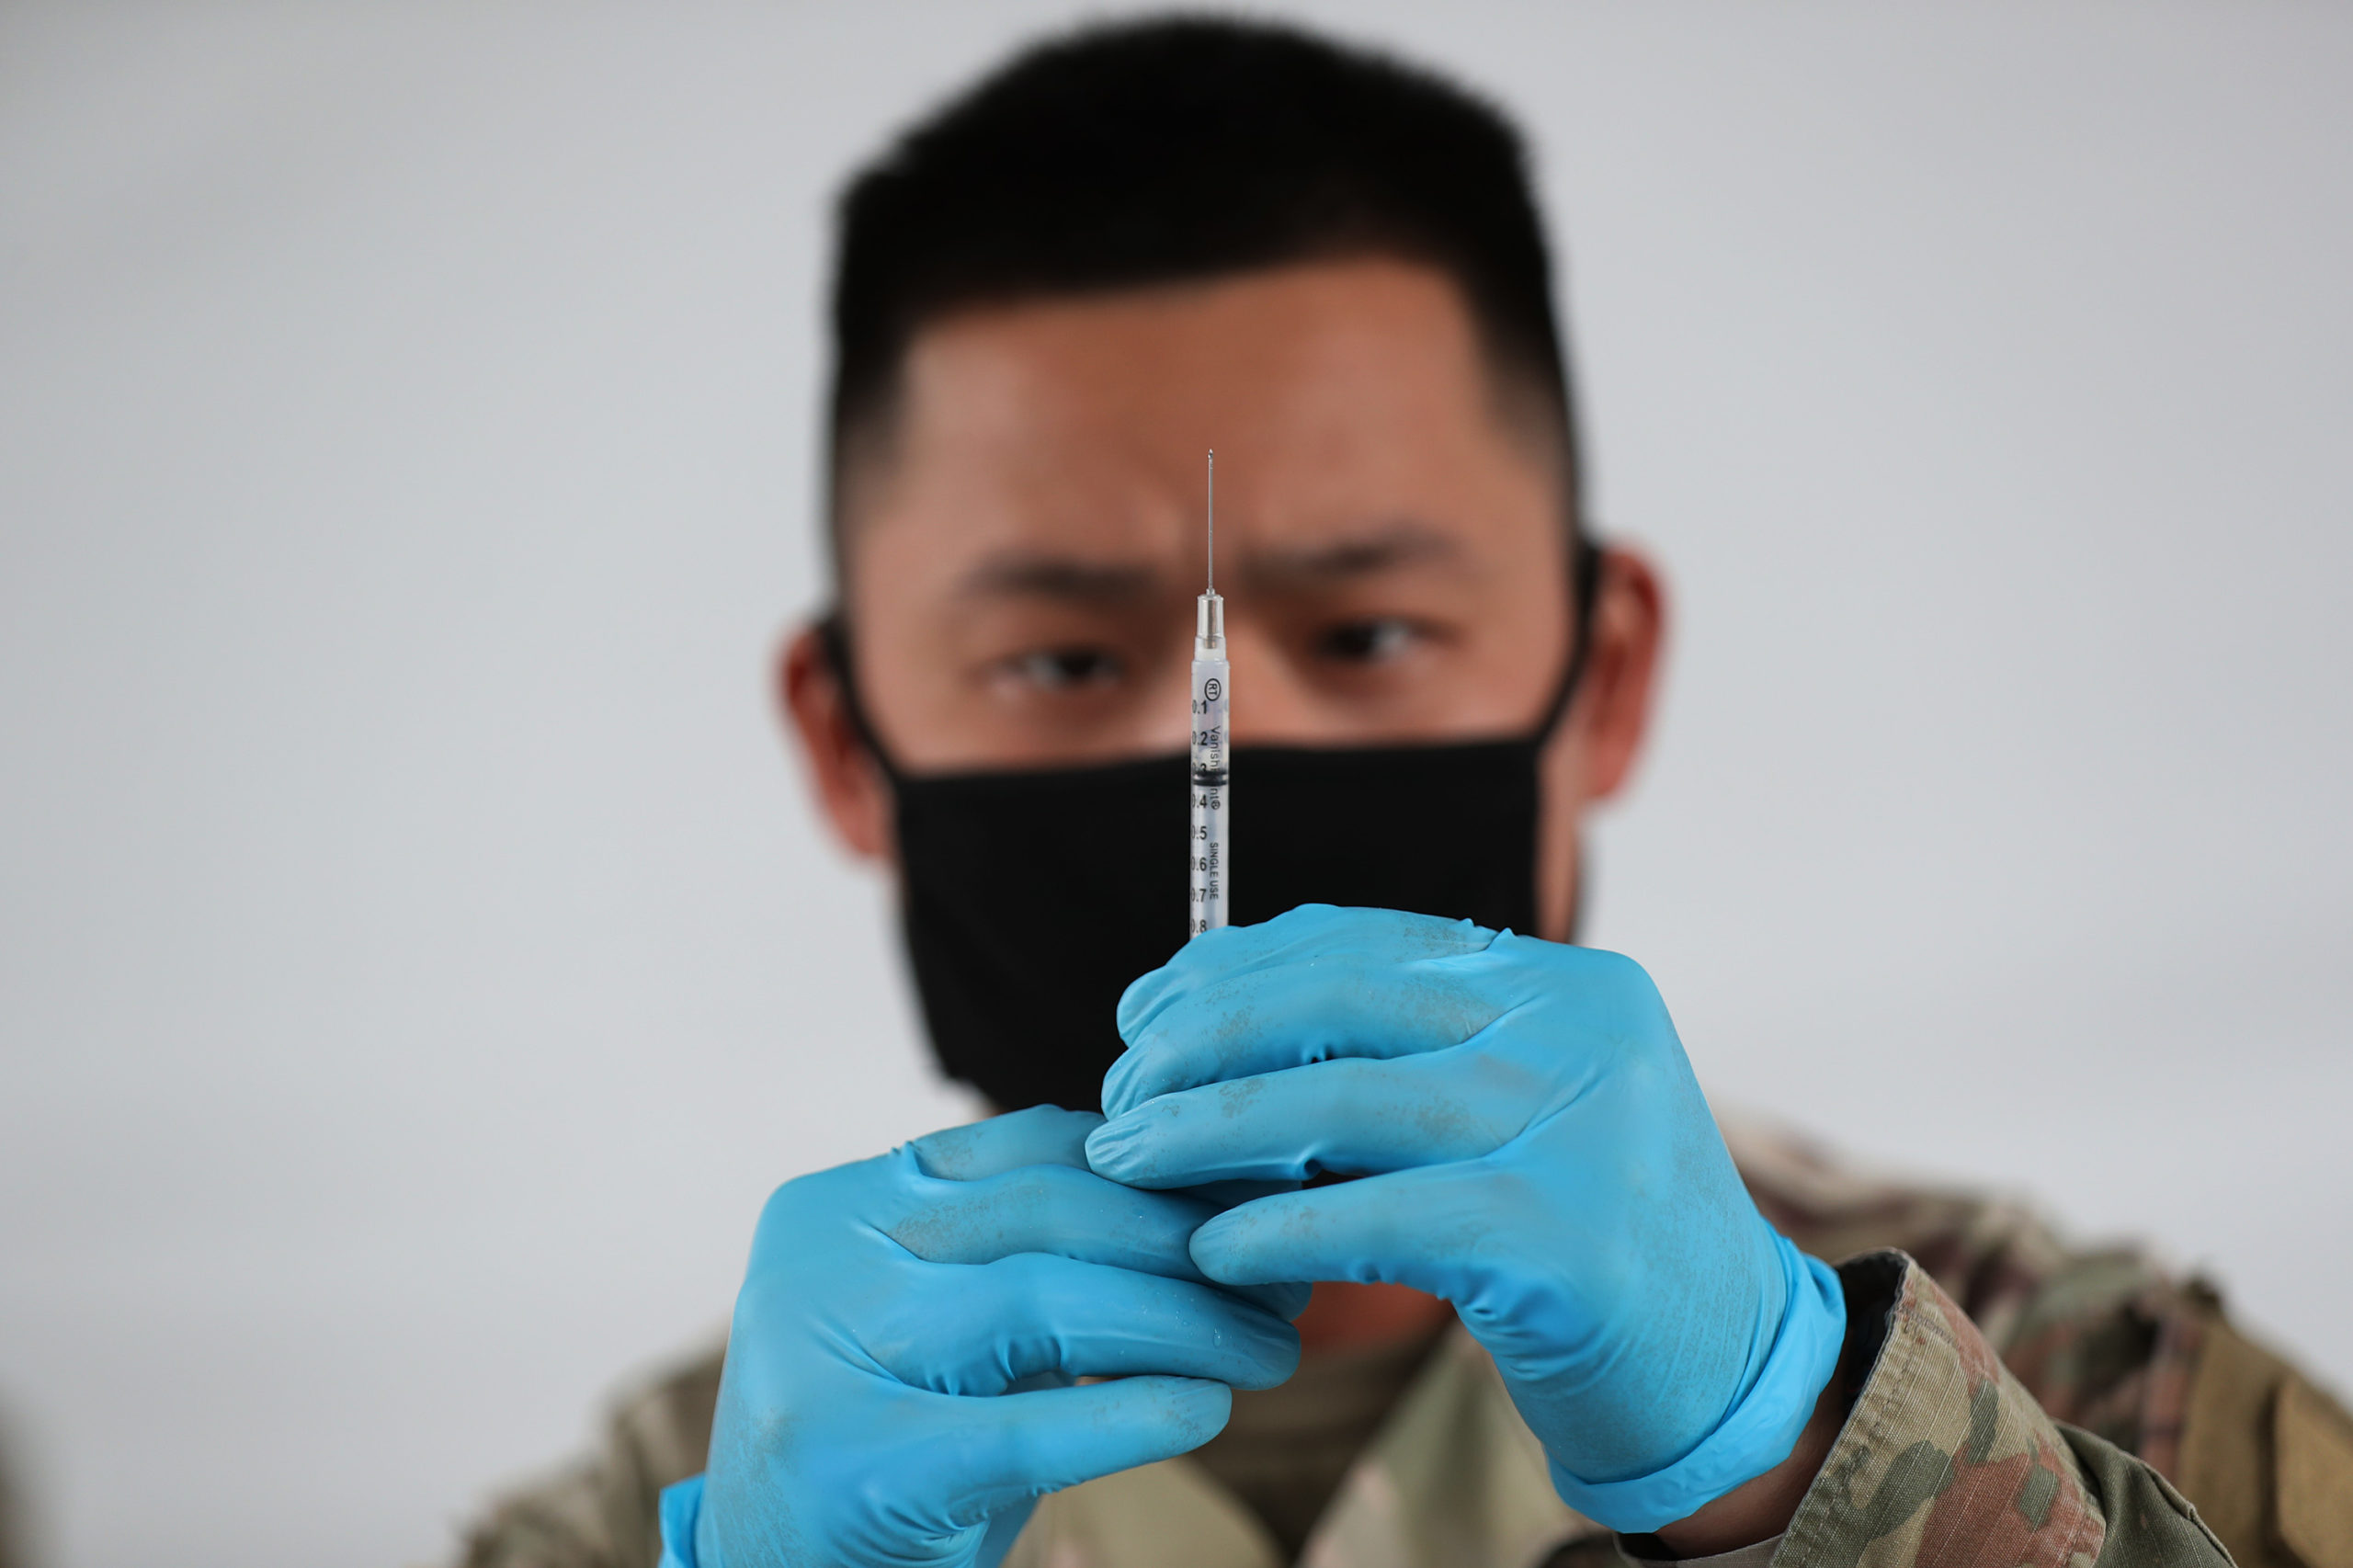 H 09: A U.S. Army soldier from the 2nd Armored Brigade Combat Team, 1st Infantry Division, prepares Pfizer COVID-19 vaccines to inoculate people at the Miami Dade College North Campus on March 09, 2021 in North Miami, Florida. The soldiers deployed to assist the Federal Emergency Management Agency at the state-run, federally-supported COVID-19 Community Vaccination Center. (Photo by Joe Raedle/Getty Images)